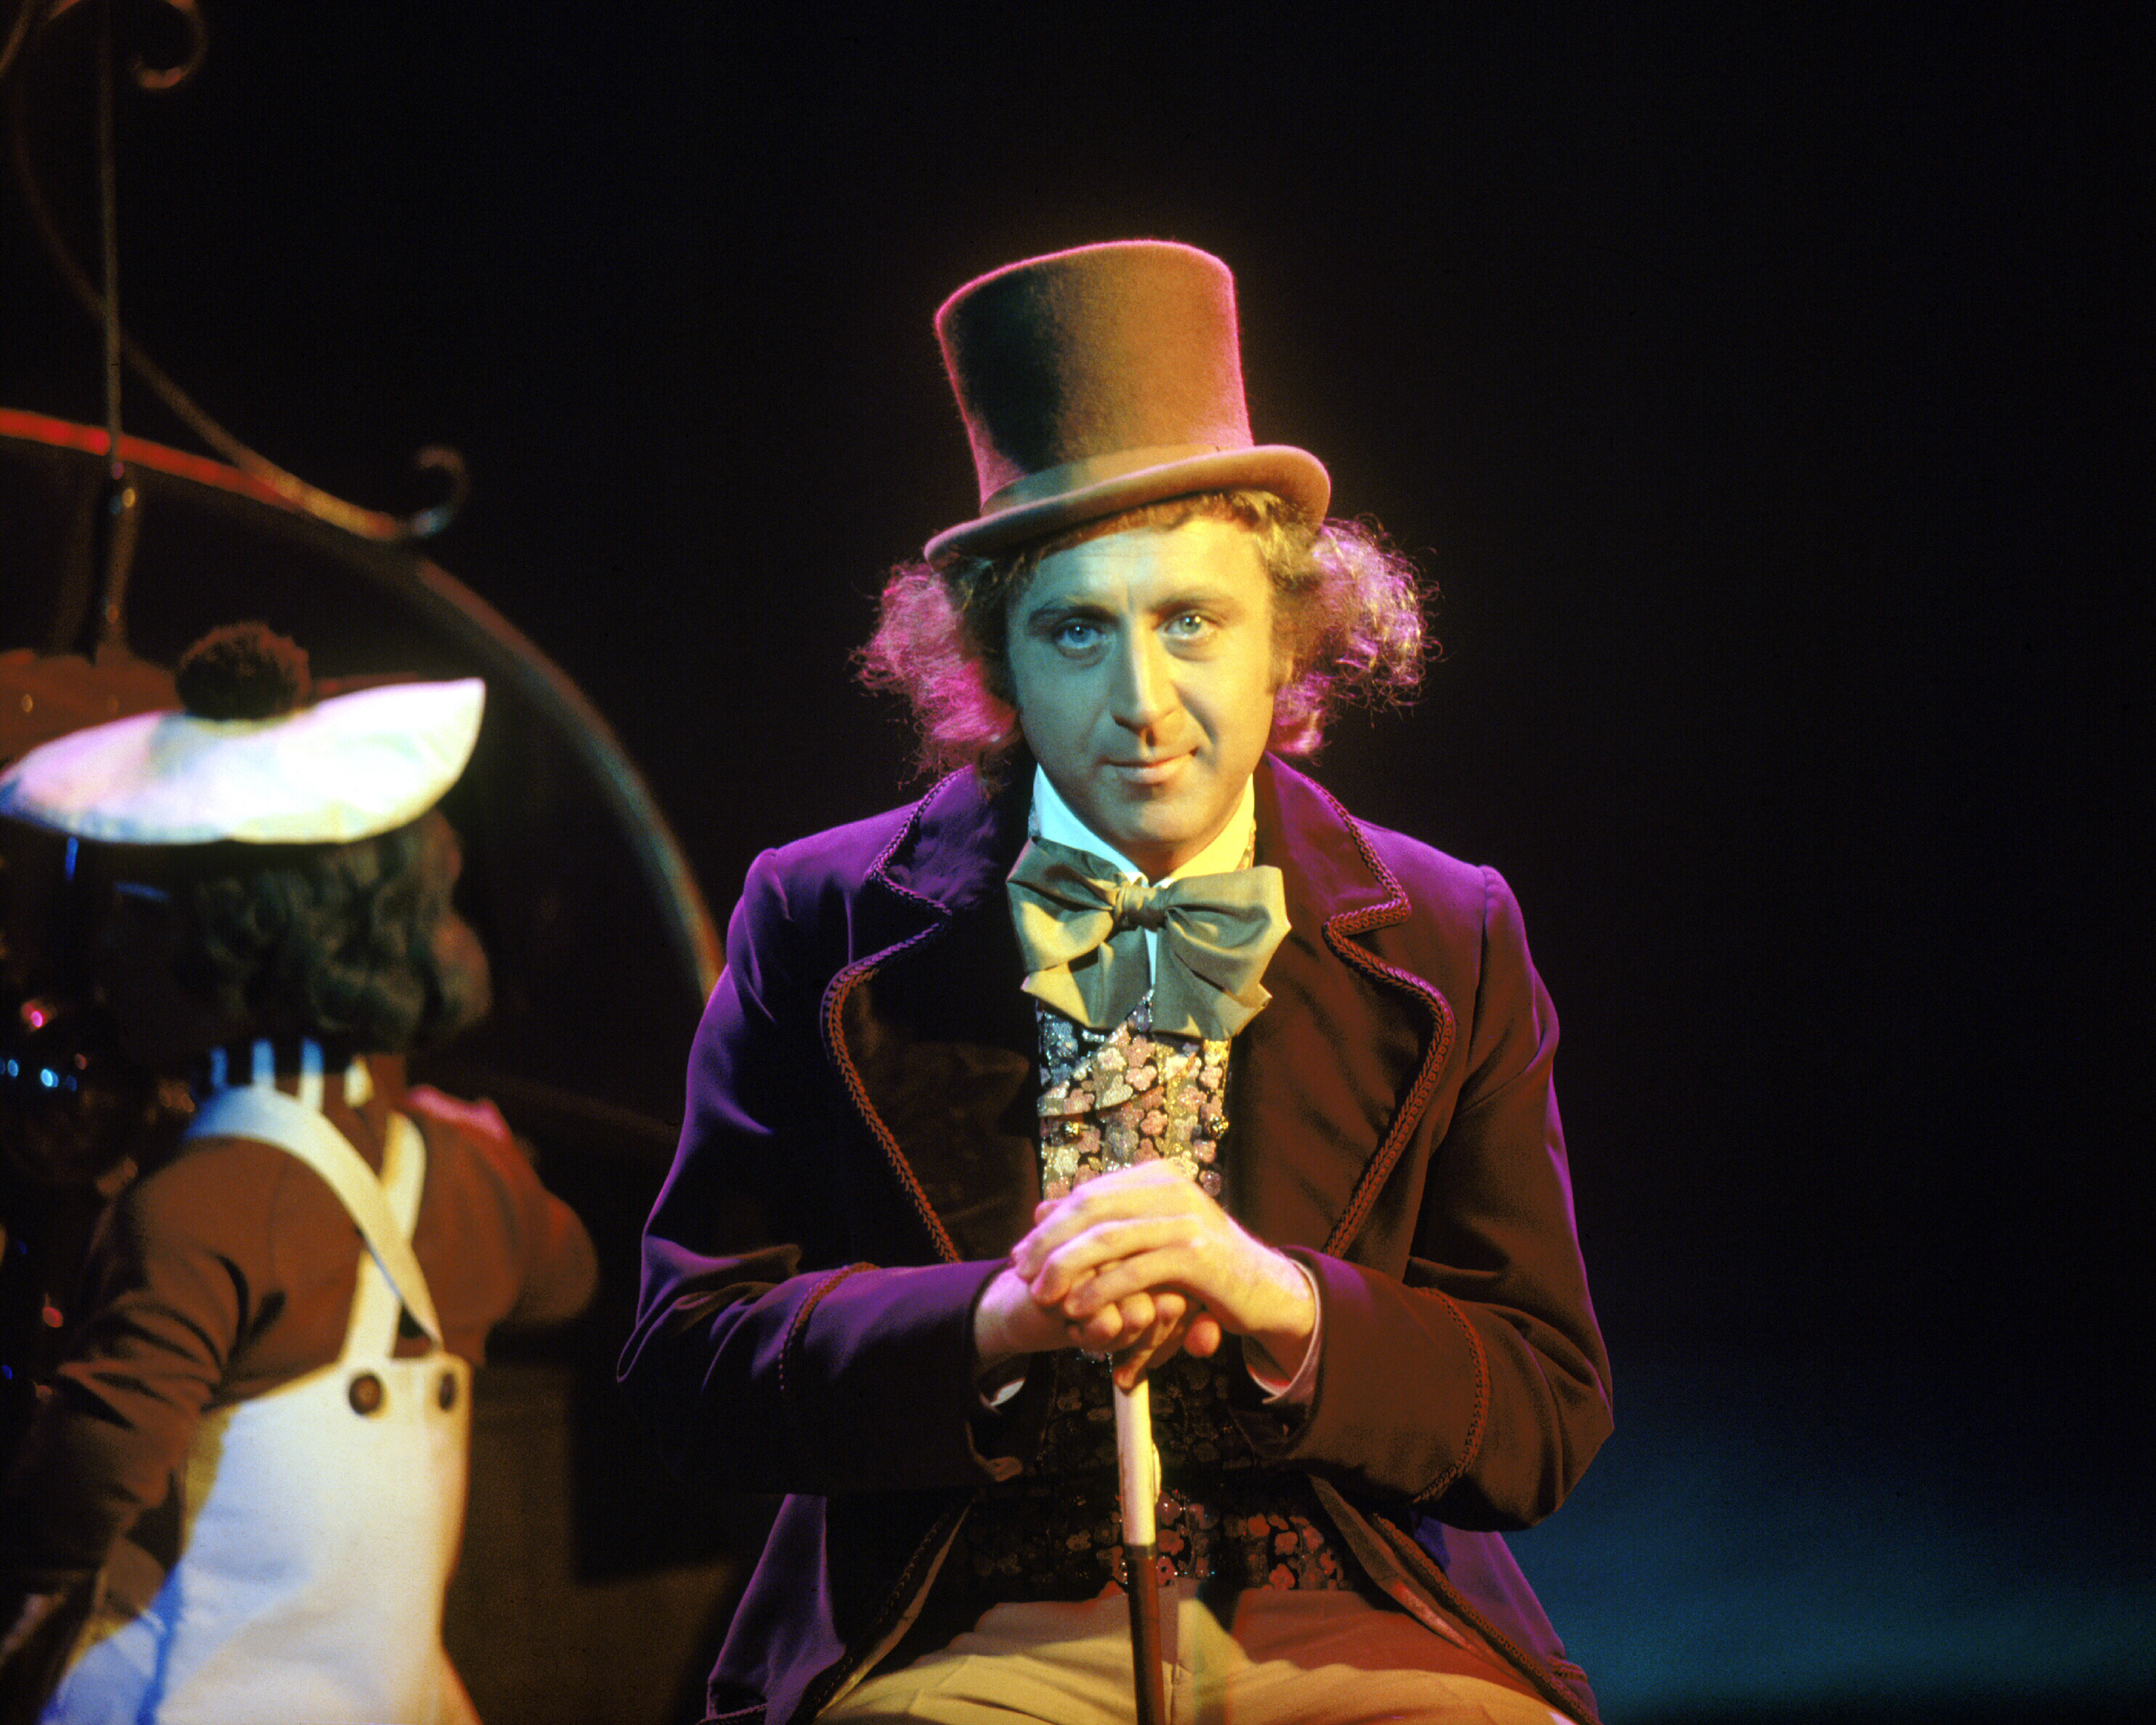 <p><em>Willy Wonka and the Chocolate Factory</em> <span>is one of the most beloved children’s films ever, thanks in no small part to Gene Wilder’s performance as the titular candy-maker. Though the film seems to sand away some of the rougher edges of Roald Dahl's original novel, there’s still plenty of darkness lurking here, whether it’s the sinister chorus of the Oompa-Loompas or the ambiguous fate of the children whose misdeeds earn them their well-deserved punishments. And, of course, there is the demented boat ride, which remains one of the trippiest and most disturbing scenes in a children’s film.</span></p><p>You may also like: <a href='https://www.yardbarker.com/entertainment/articles/class_clowns_the_25_best_movies_about_college_012524/s1__33230066'>Class clowns: The 25 best movies about college</a></p>